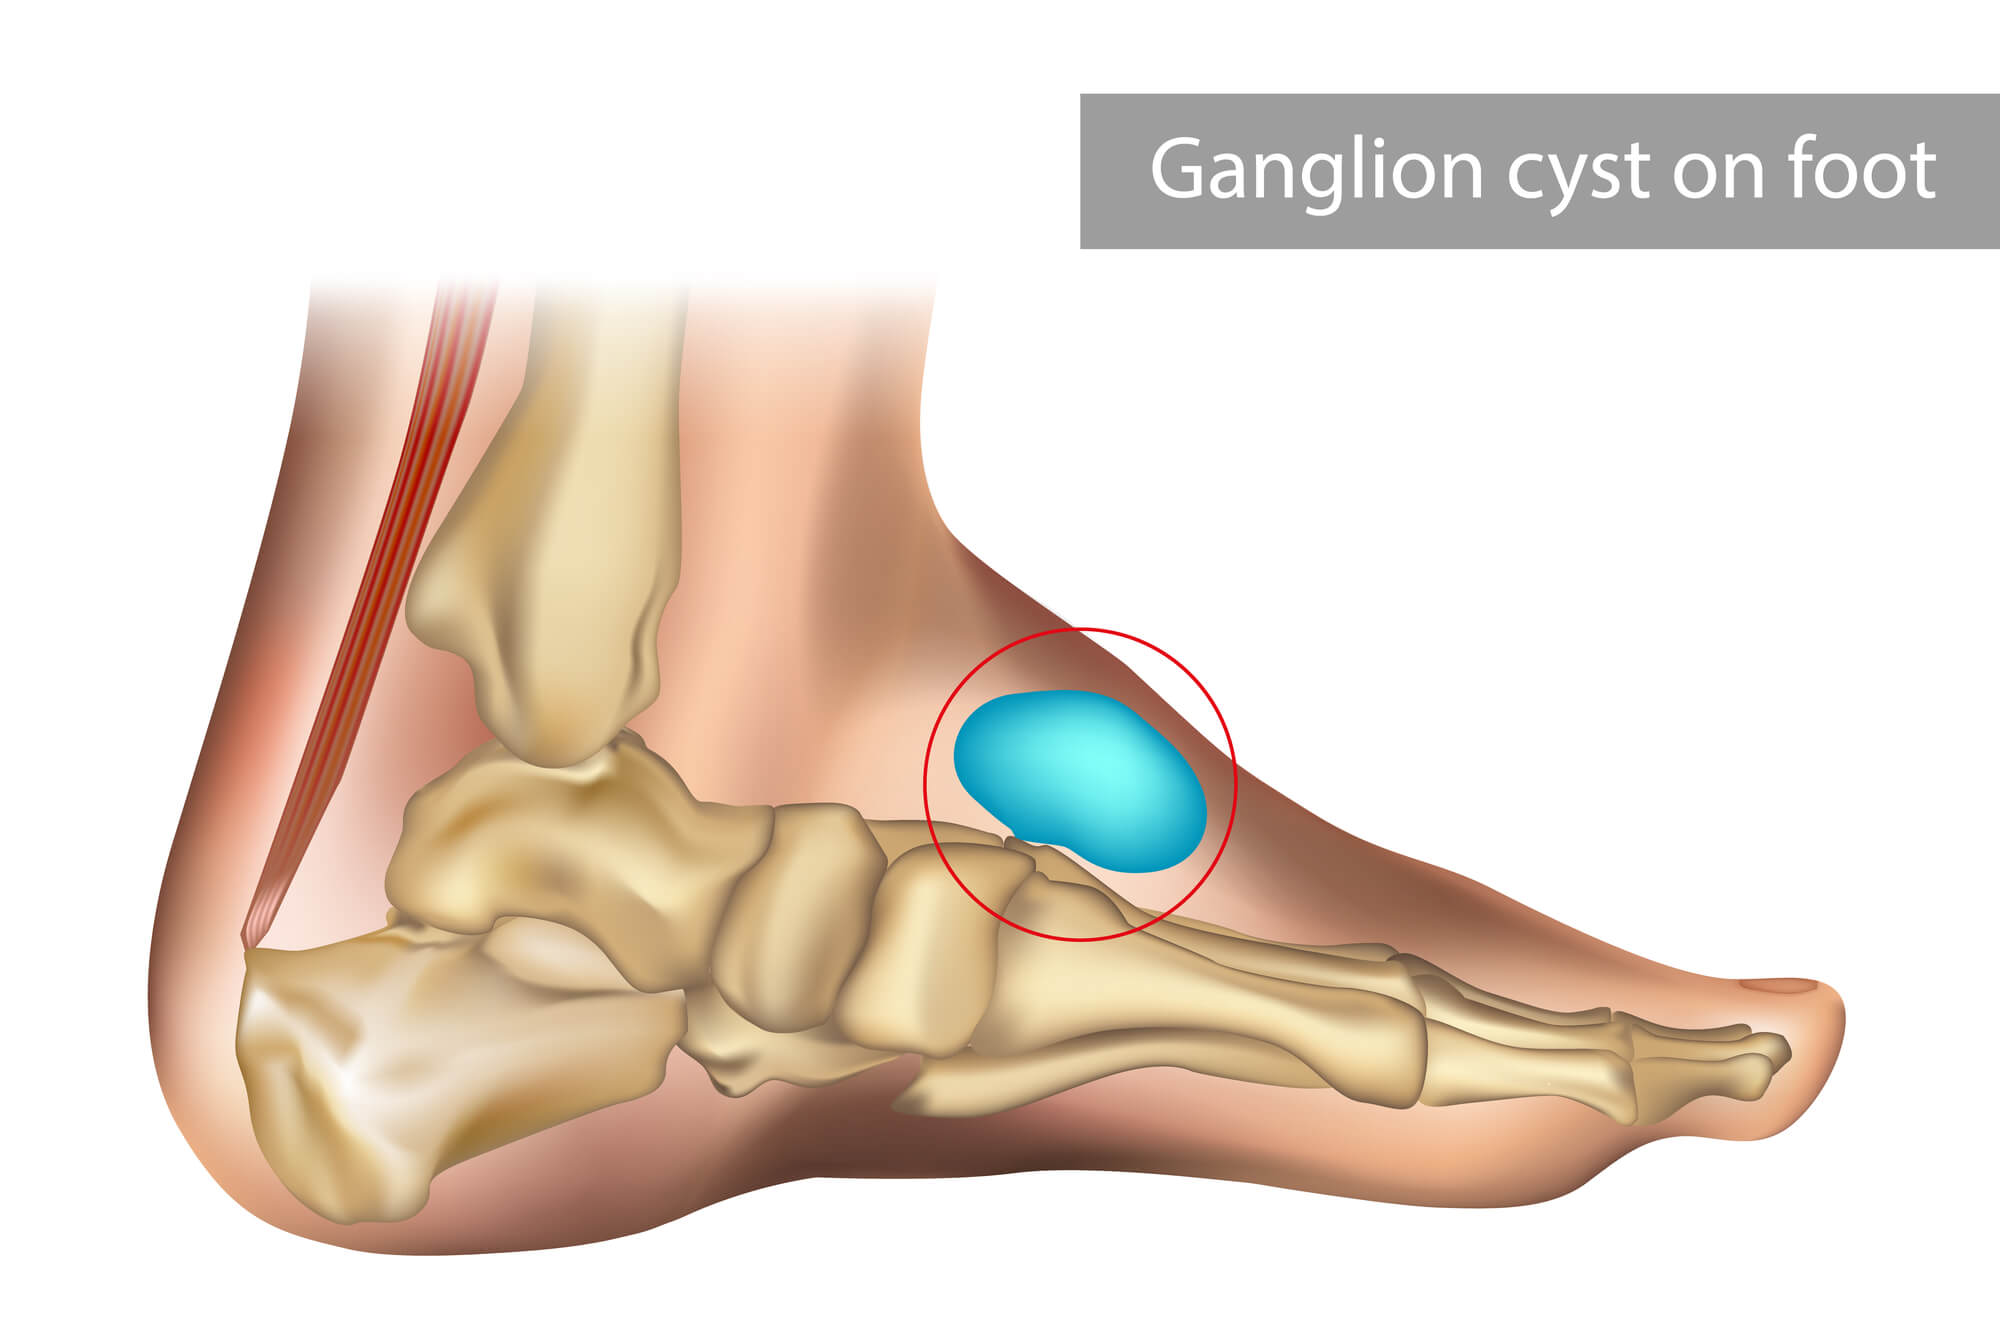 Illustration of a ganglion cyst on the foot